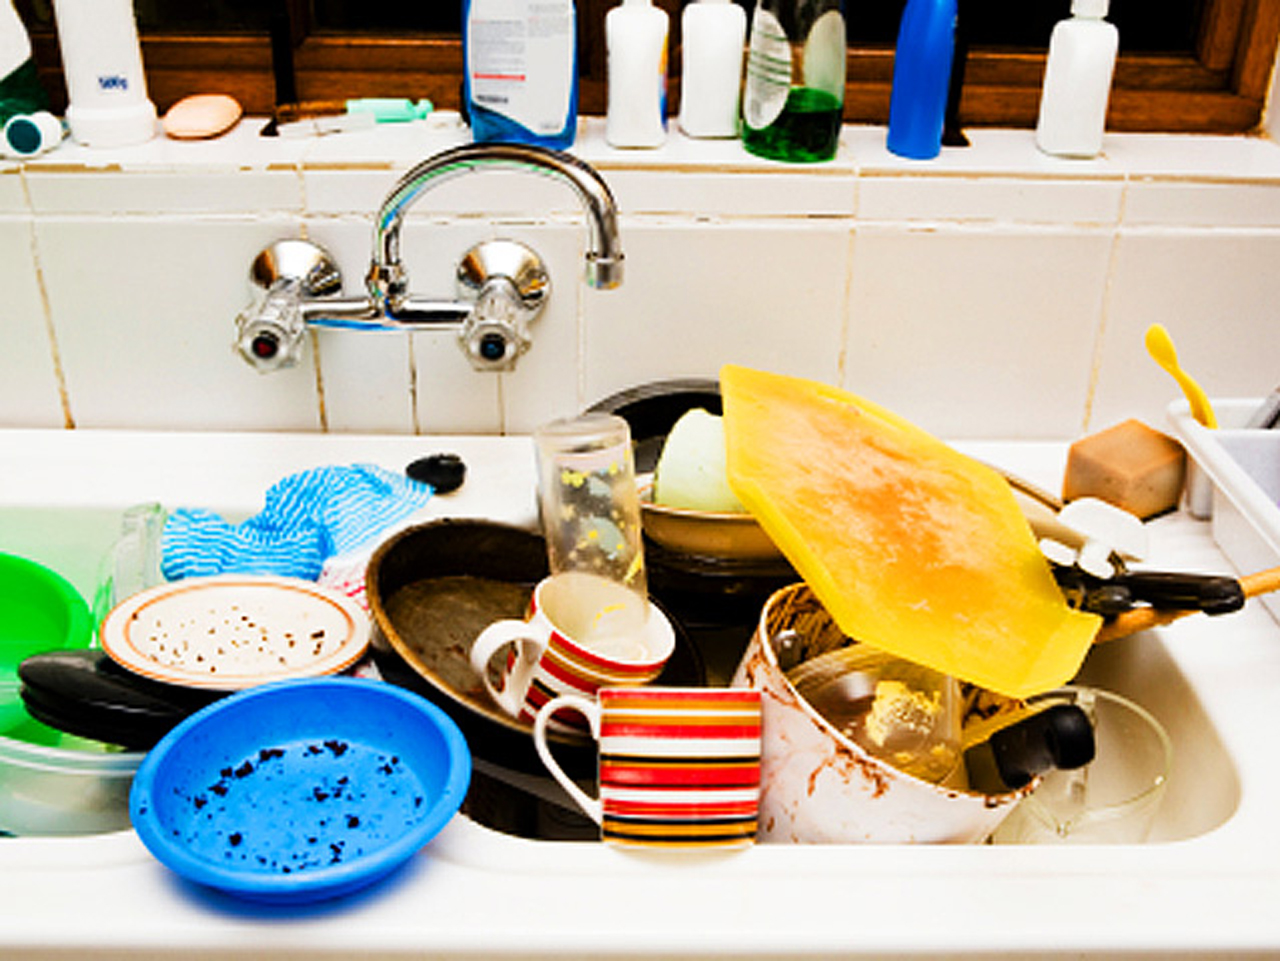 Where are germs hiding in your kitchen? Study finds surprising results -  CBS News